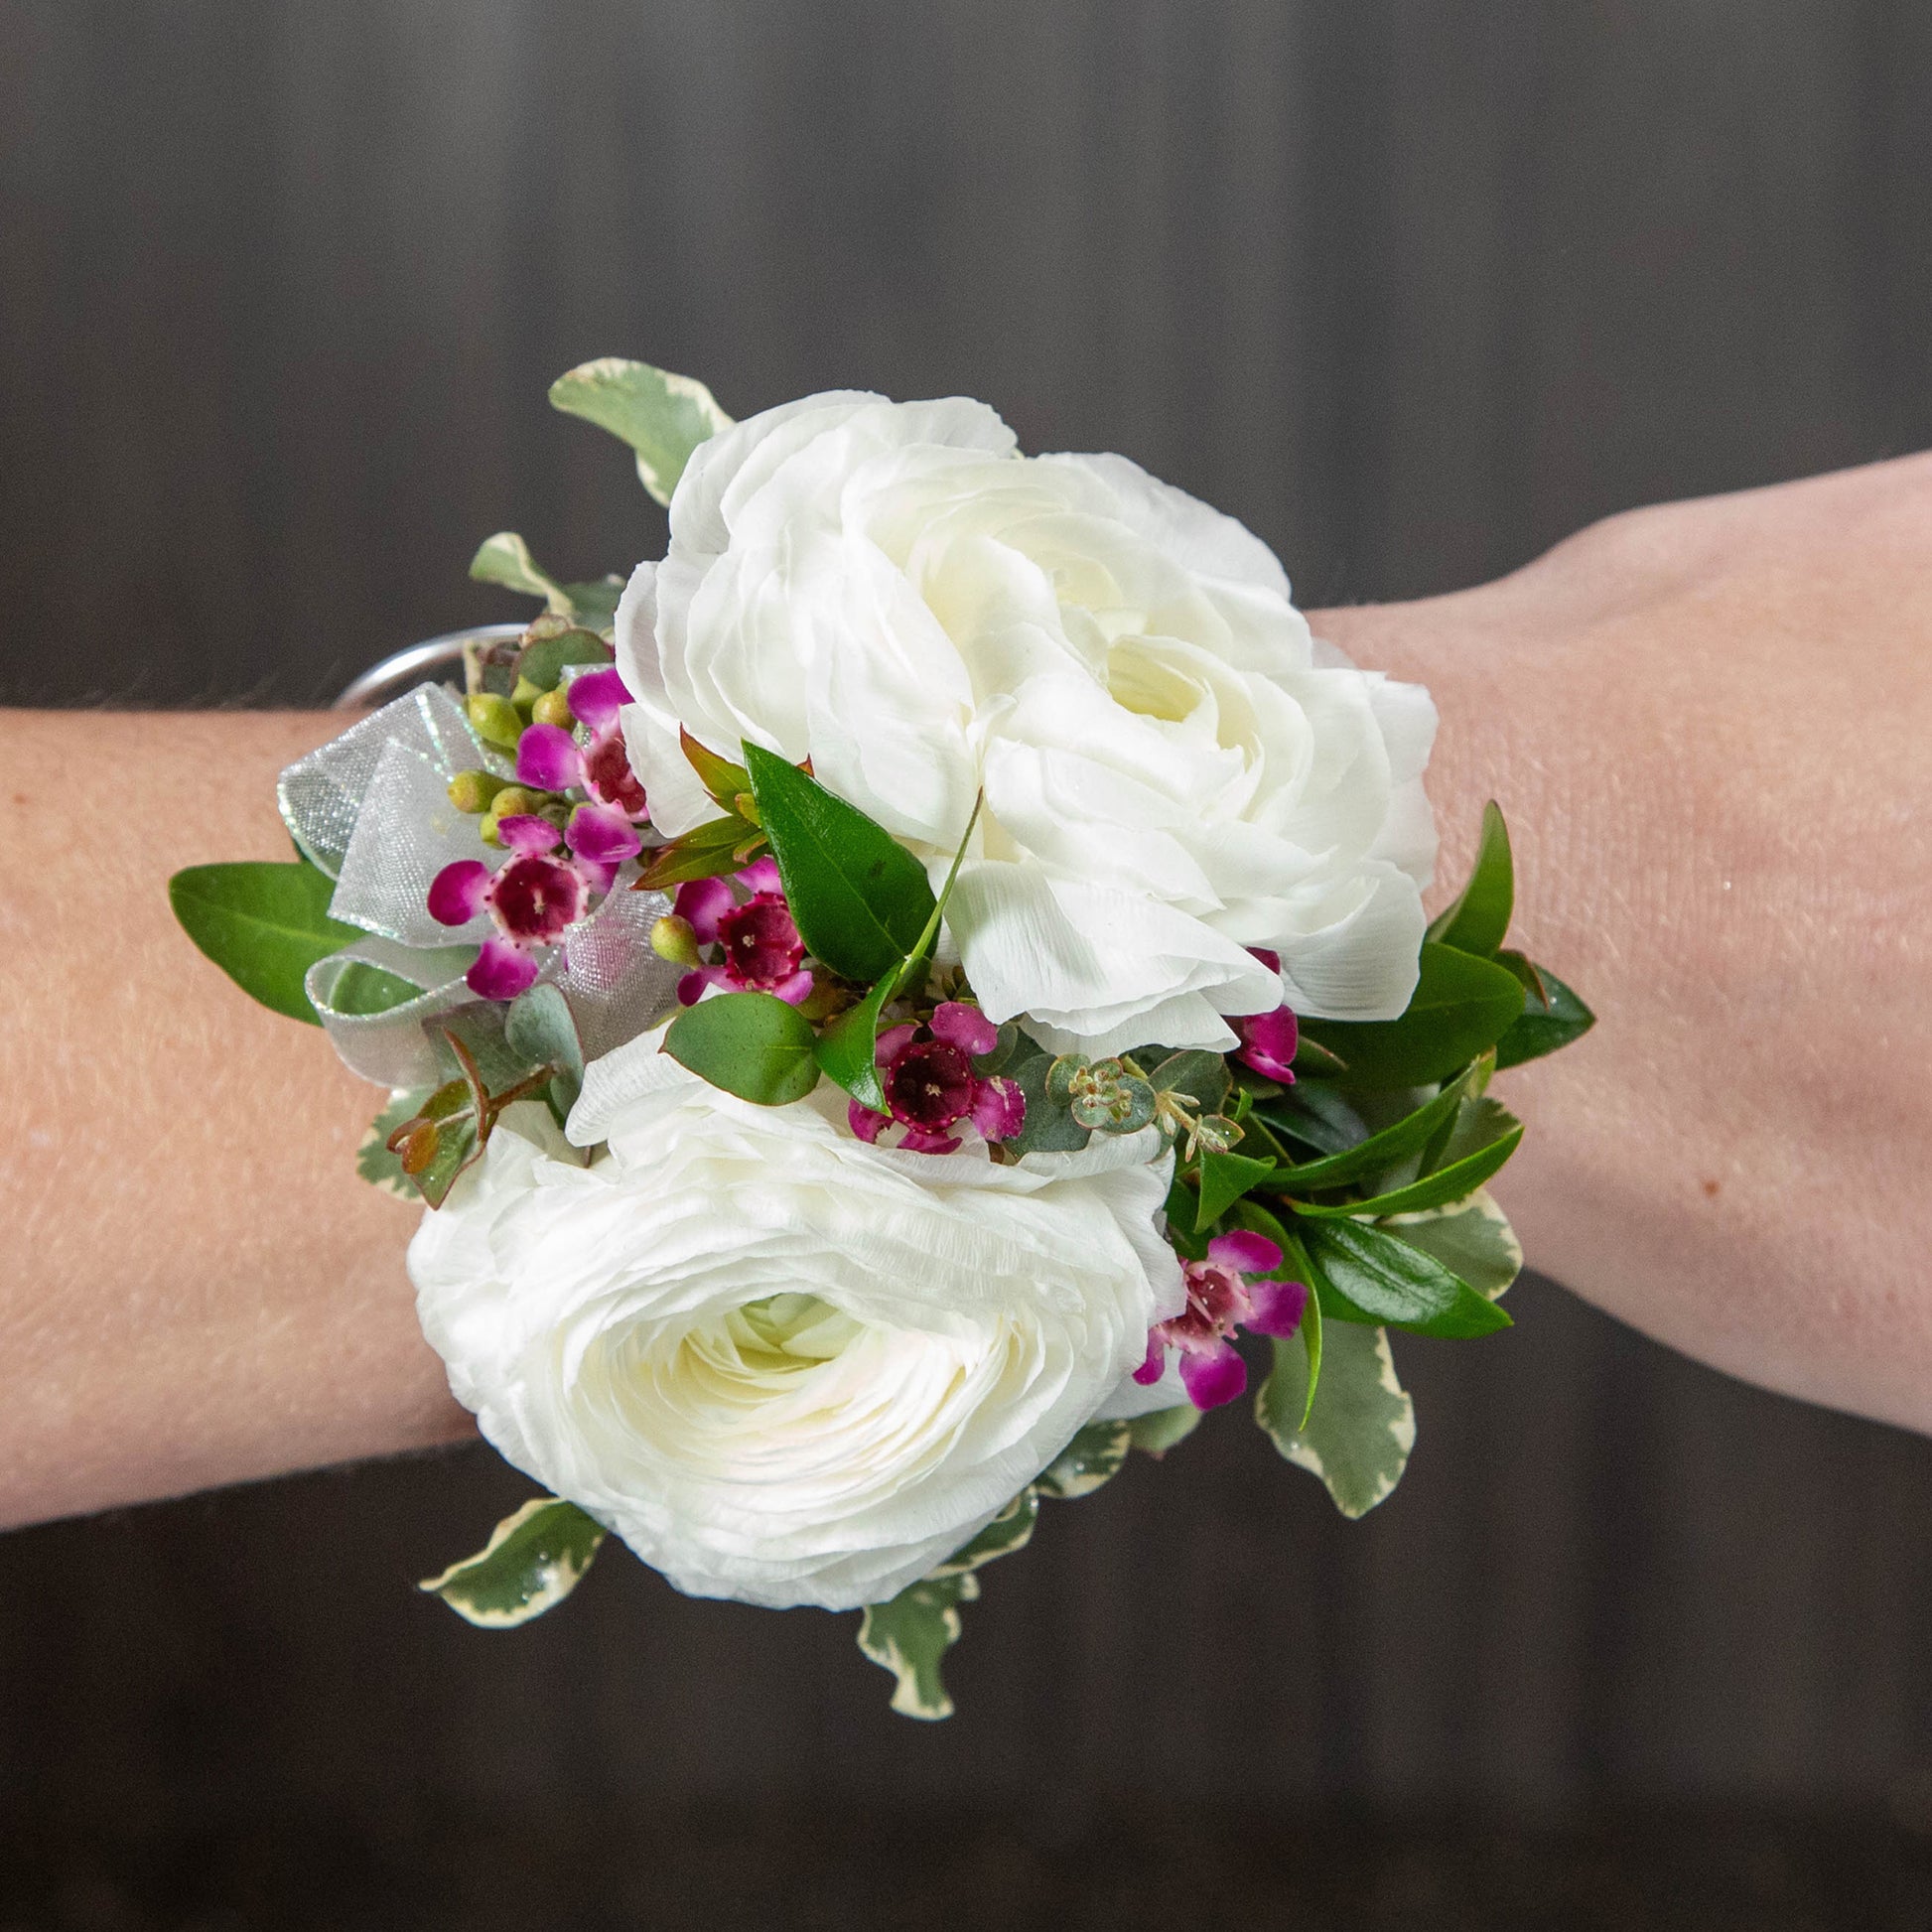 a wrist corsage made with white ranunculus, purple waxflower, and different types of greenery